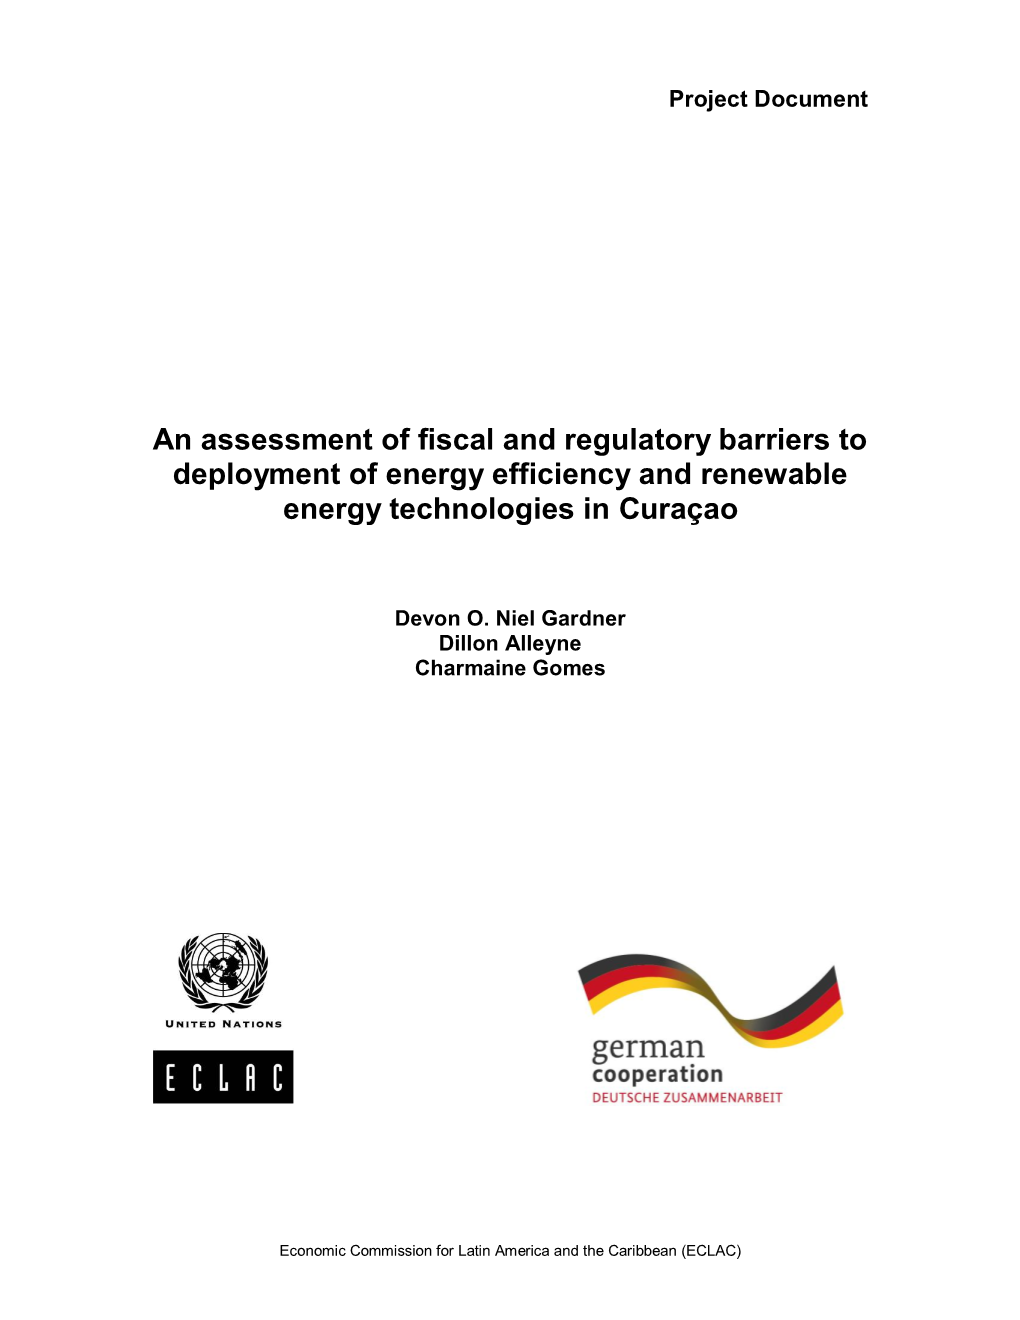 An Assessment of Fiscal and Regulatory Barriers to Deployment of Energy Efficiency and Renewable Energy Technologies in Curaçao